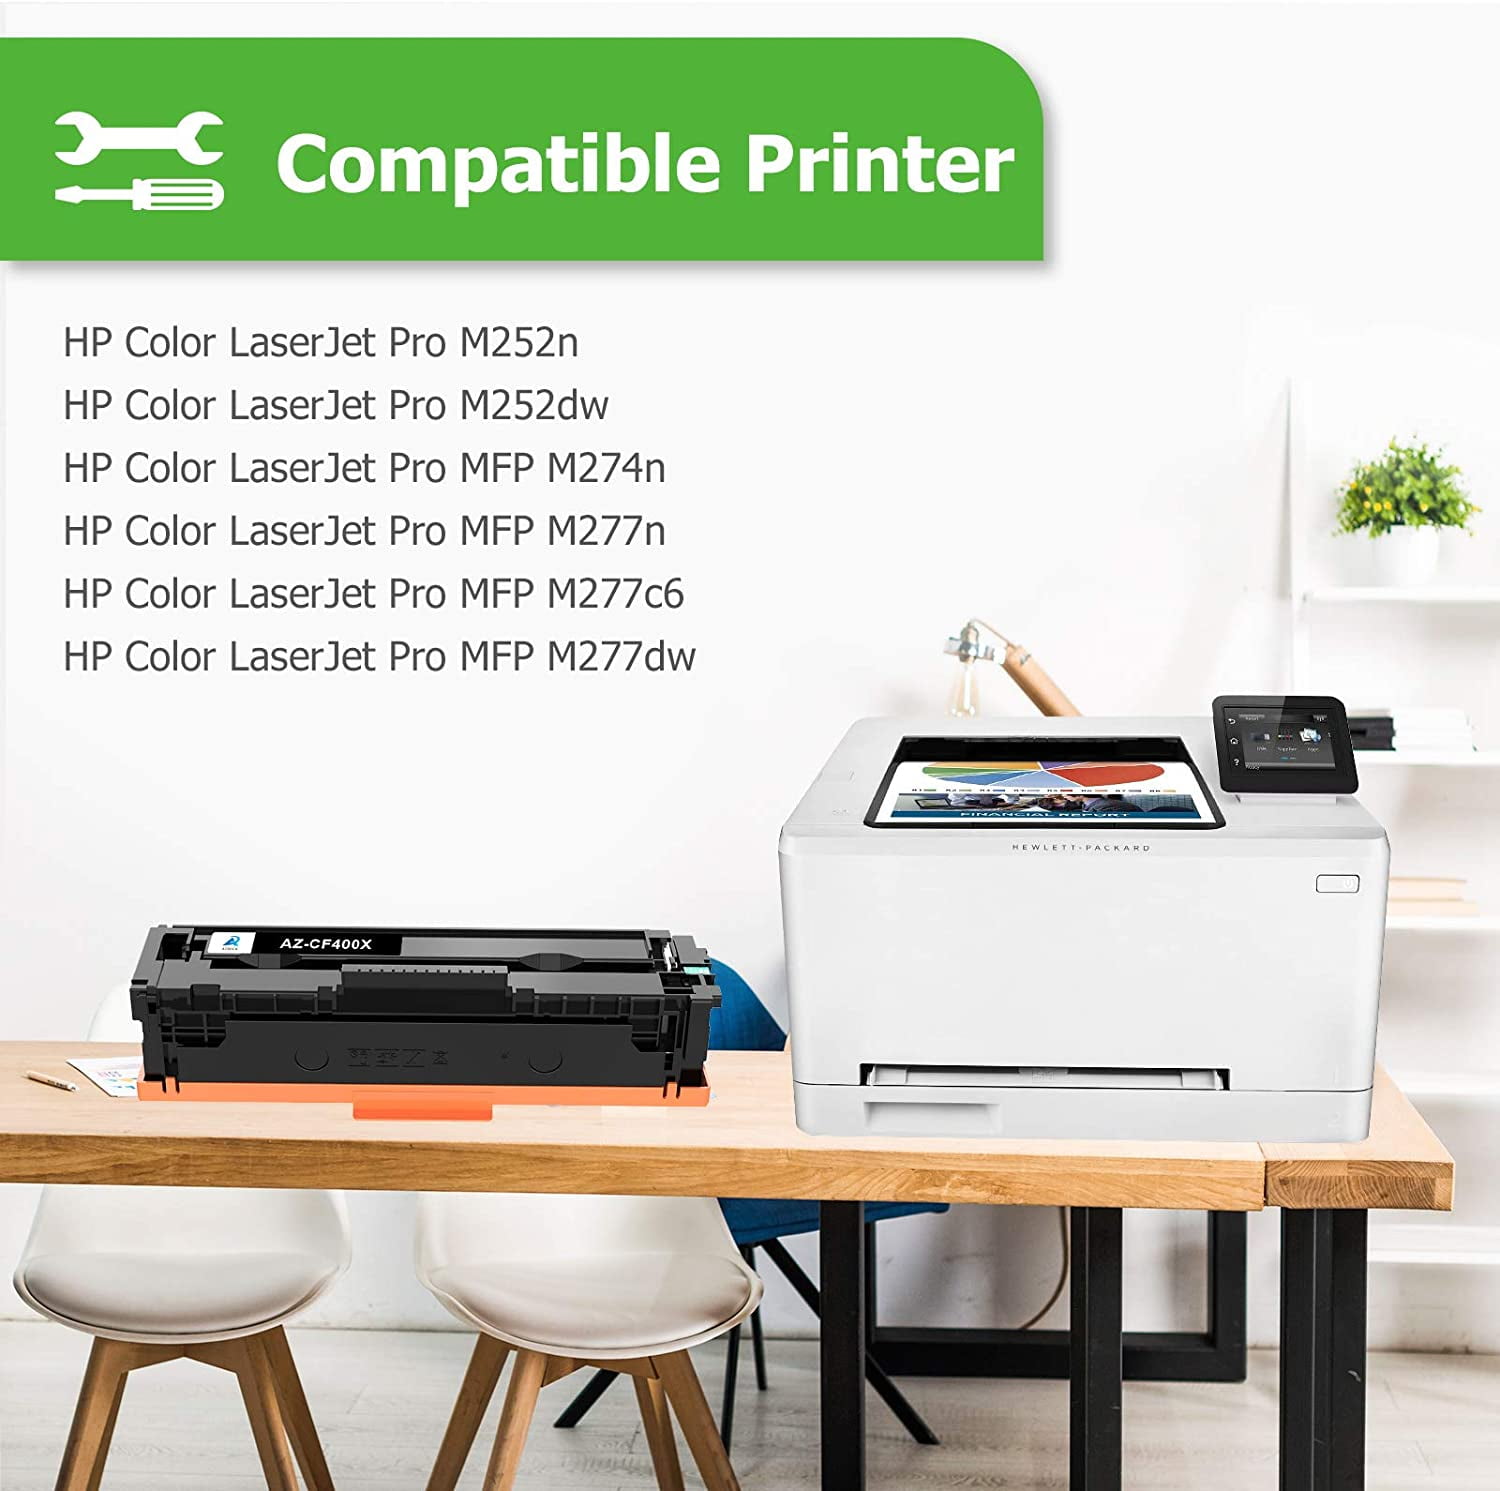 A AZTECH 4-Pack Compatible Toner Cartridge for HP 201X 201A CF400X CF400A Work with HP Color Laserjet Pro MFP M277c6 M277 M252 Printer Ink (Black,Cyan,Yellow,Magenta) - Walmart.com